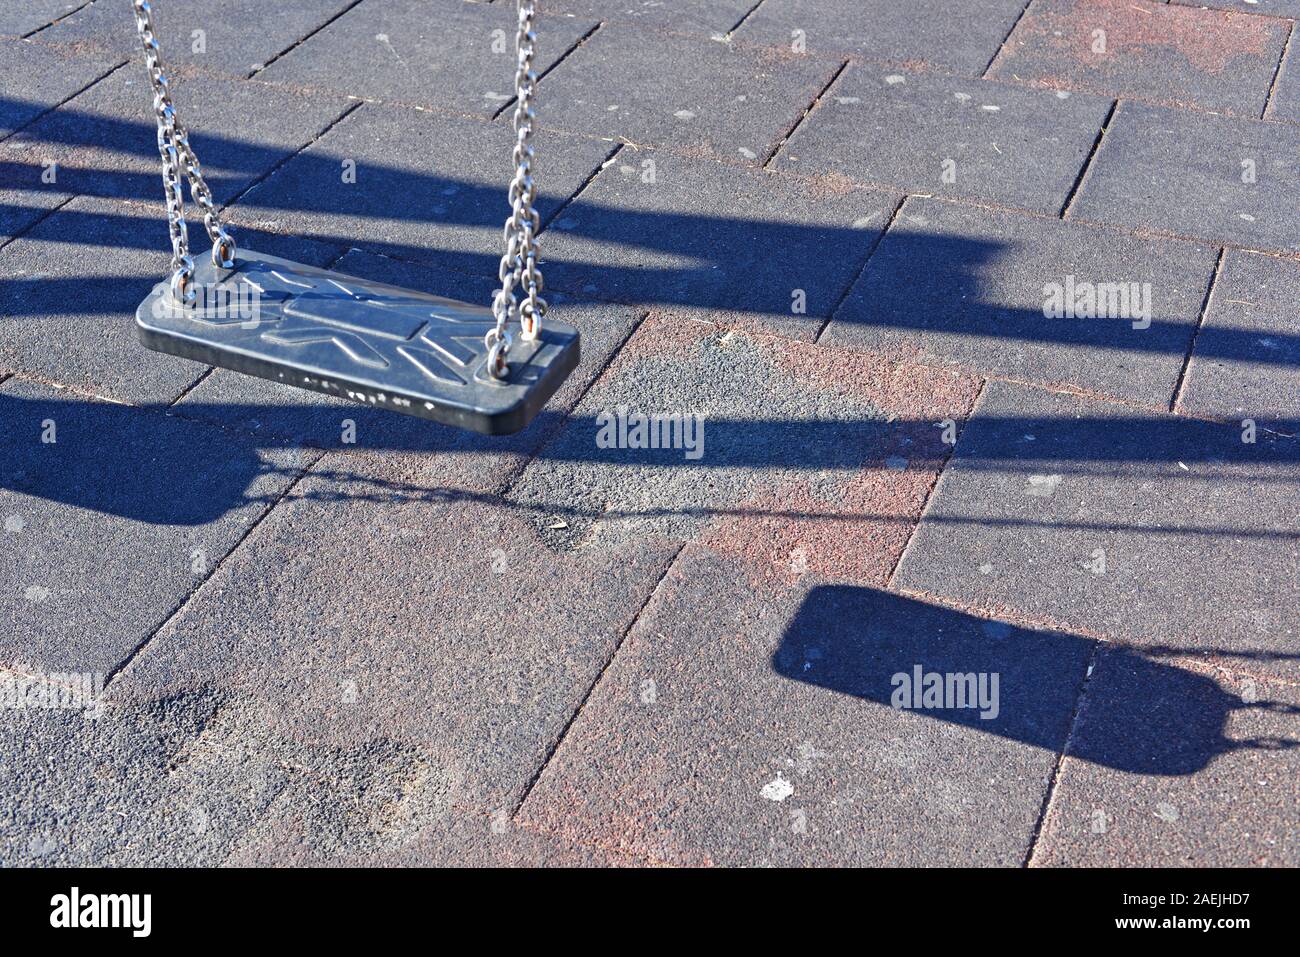 Empty swing casting shadows on the tiled ground. Stock Photo